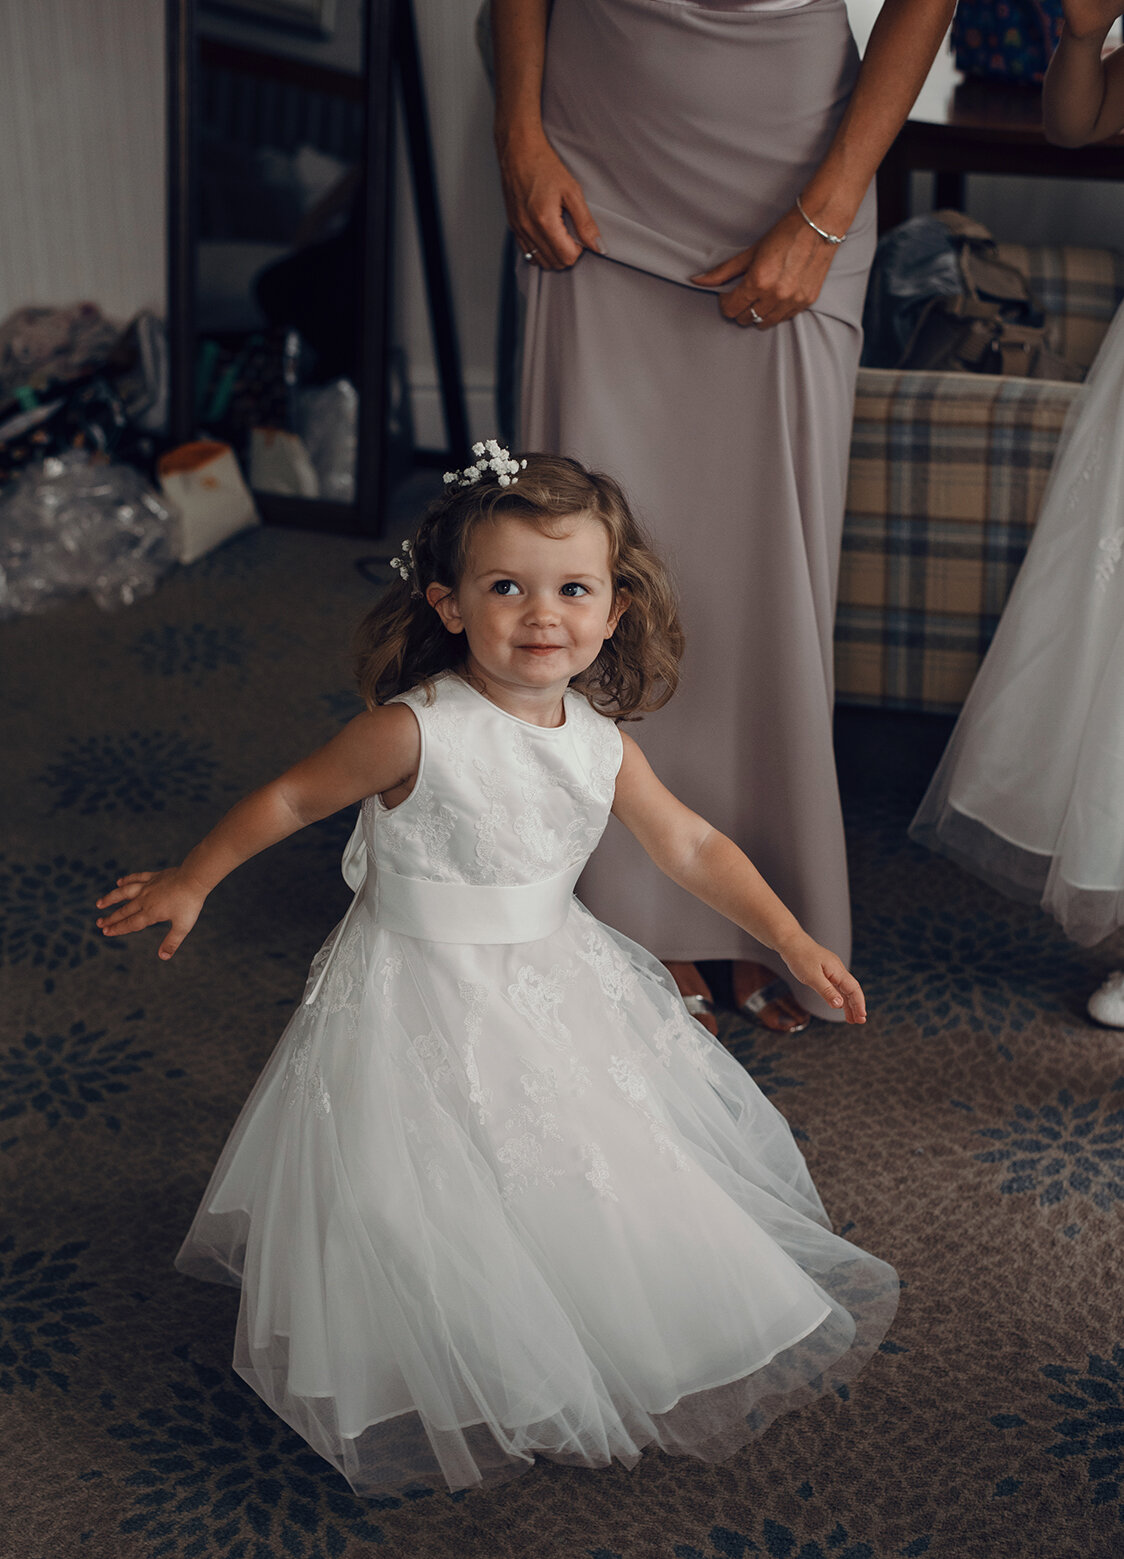 The youngest flower girl doing a twirl in her dress